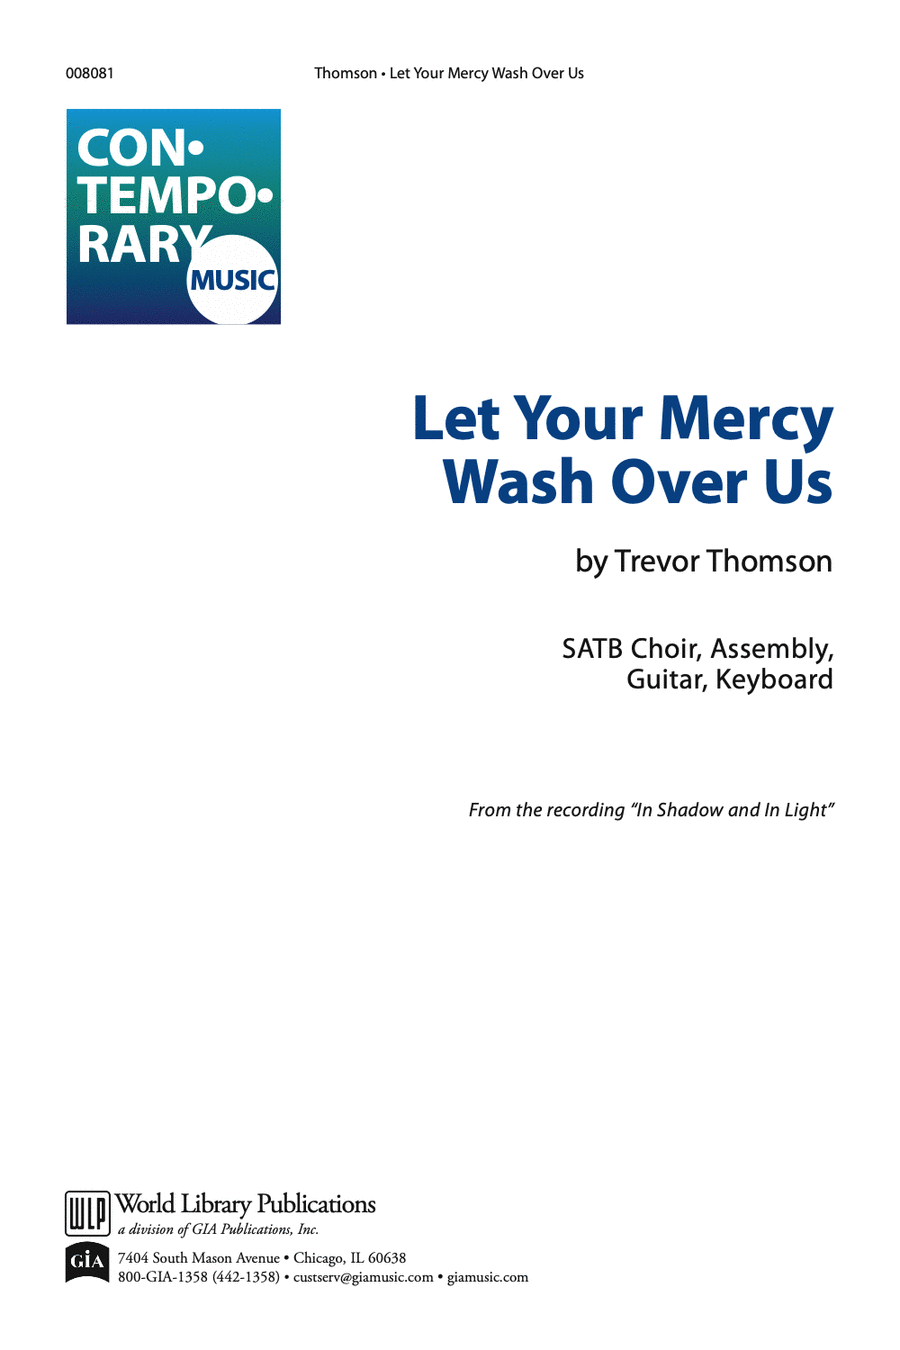 Let Your Mercy Wash Over Us